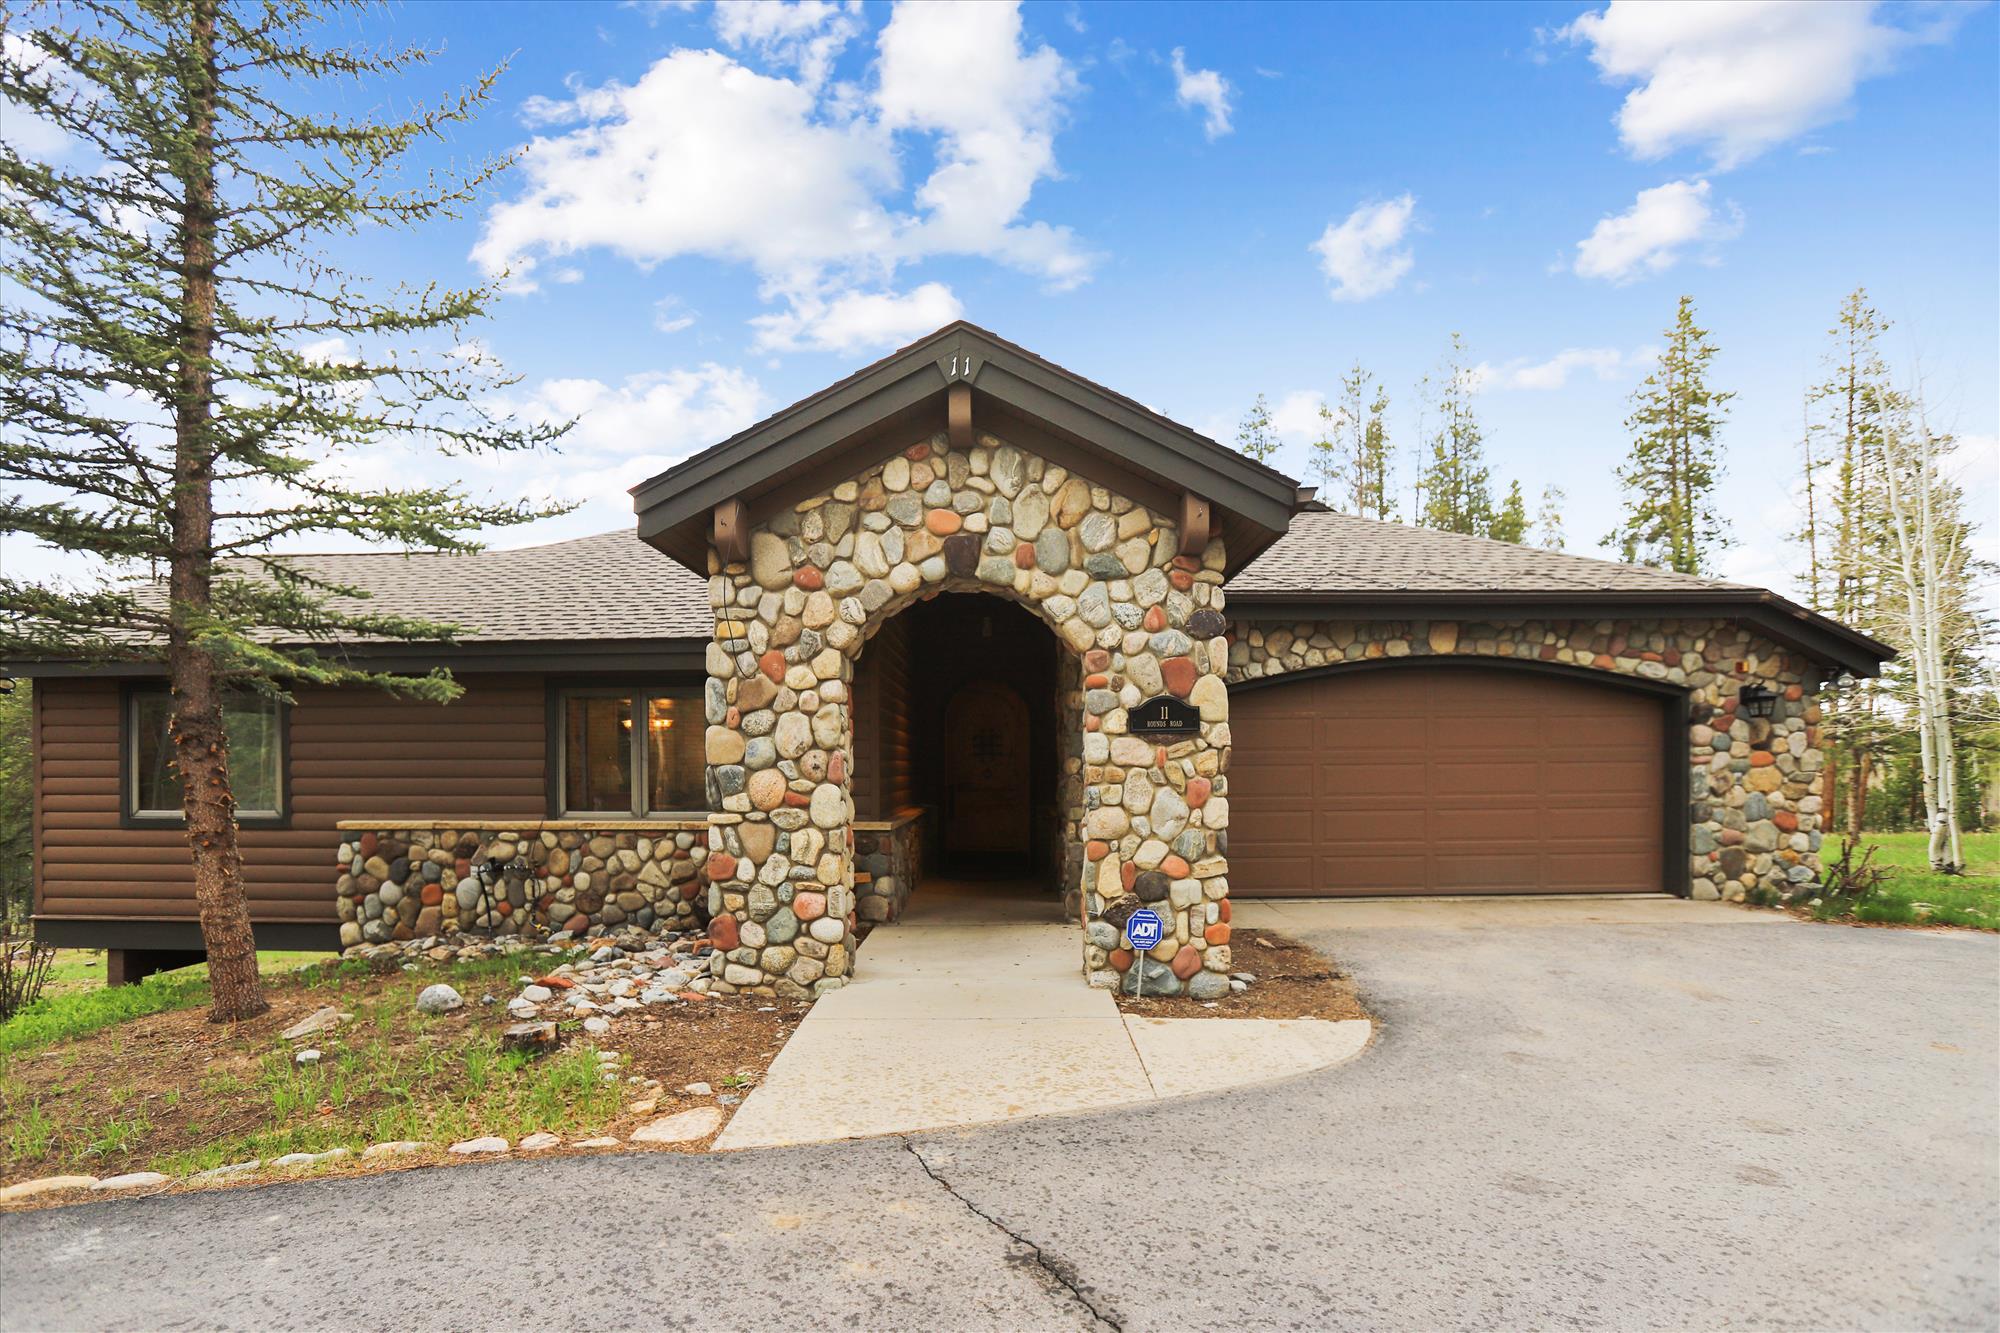 Exterior view with entryway and two car garage - Evergreen Lodge Breckenridge Vacation Rental